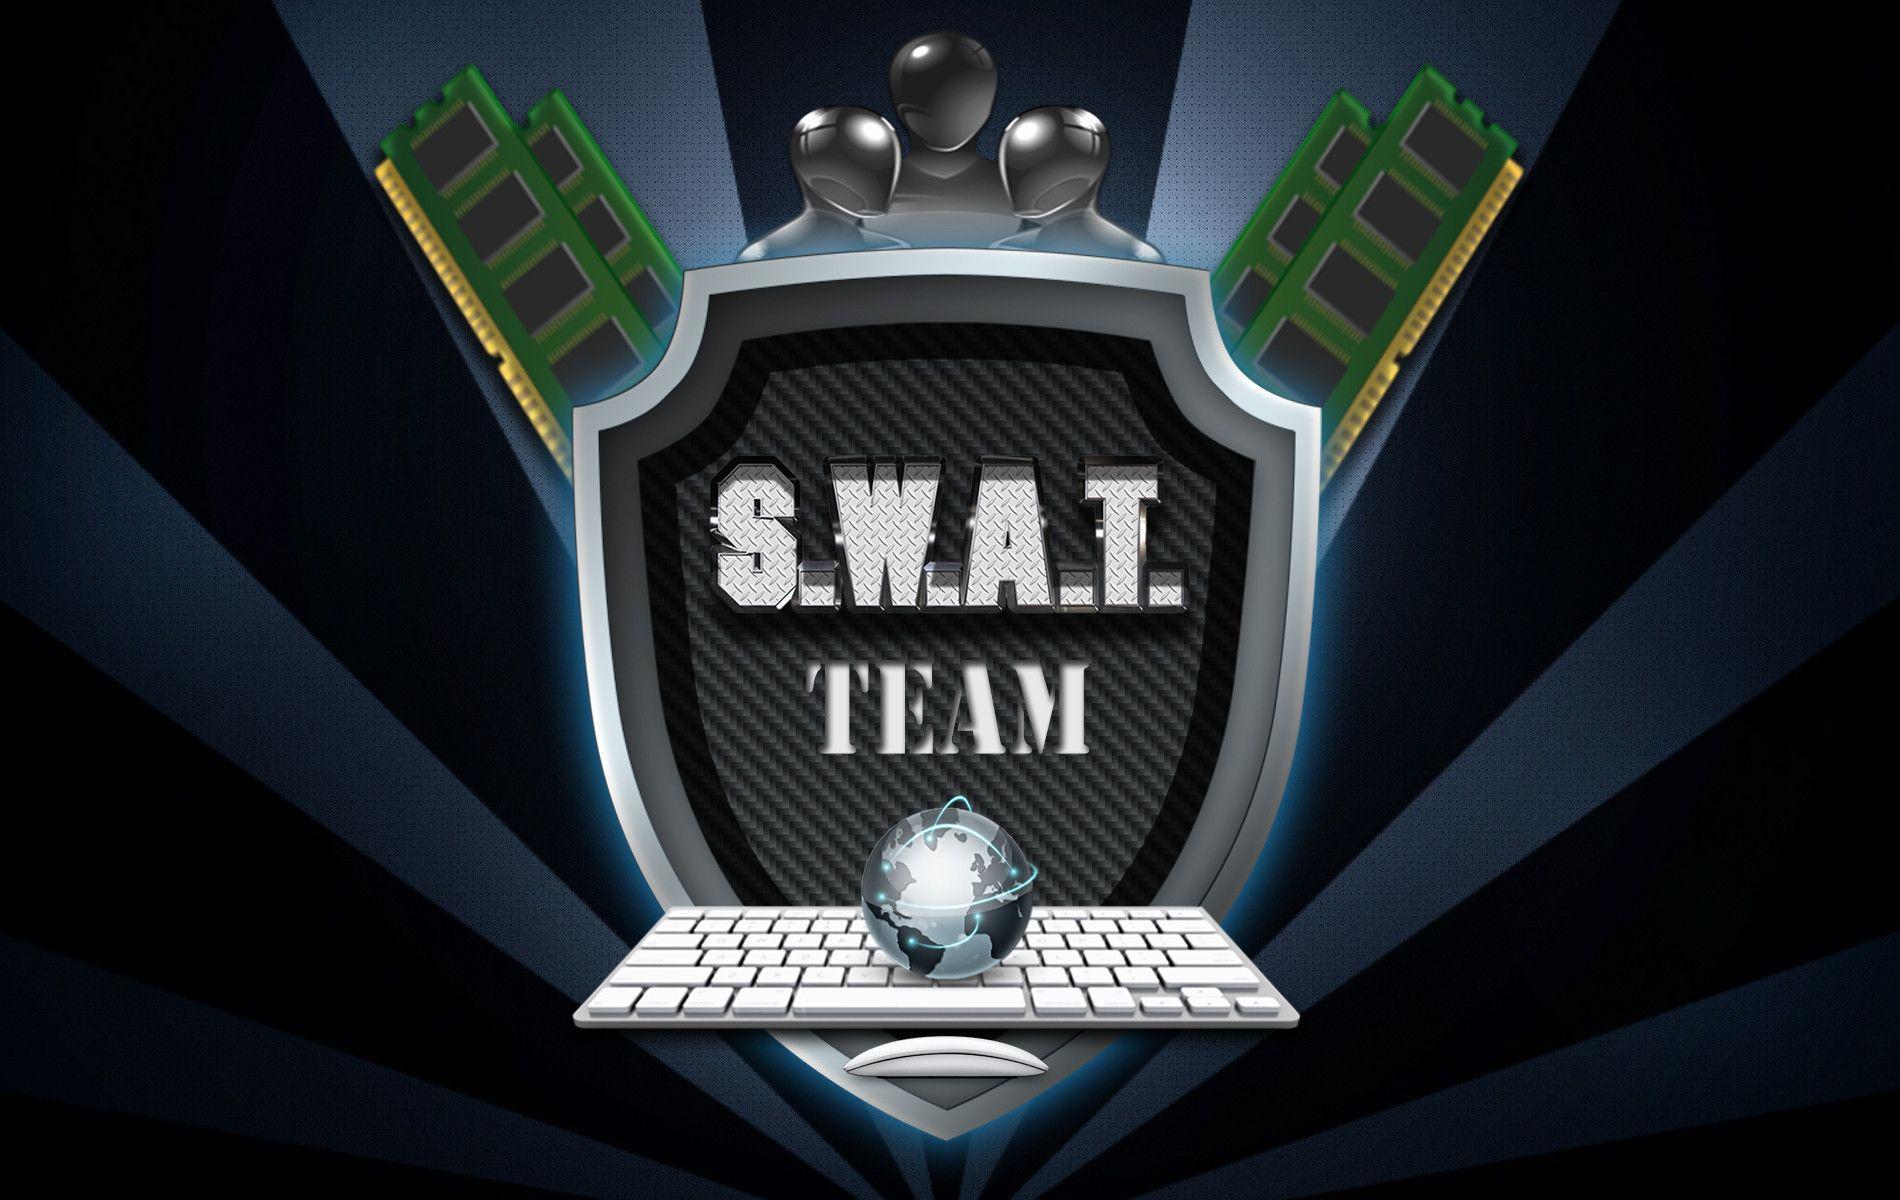 NYIT S.W.A.T. Team. Stefan Kamer: My Thoughts and Interests